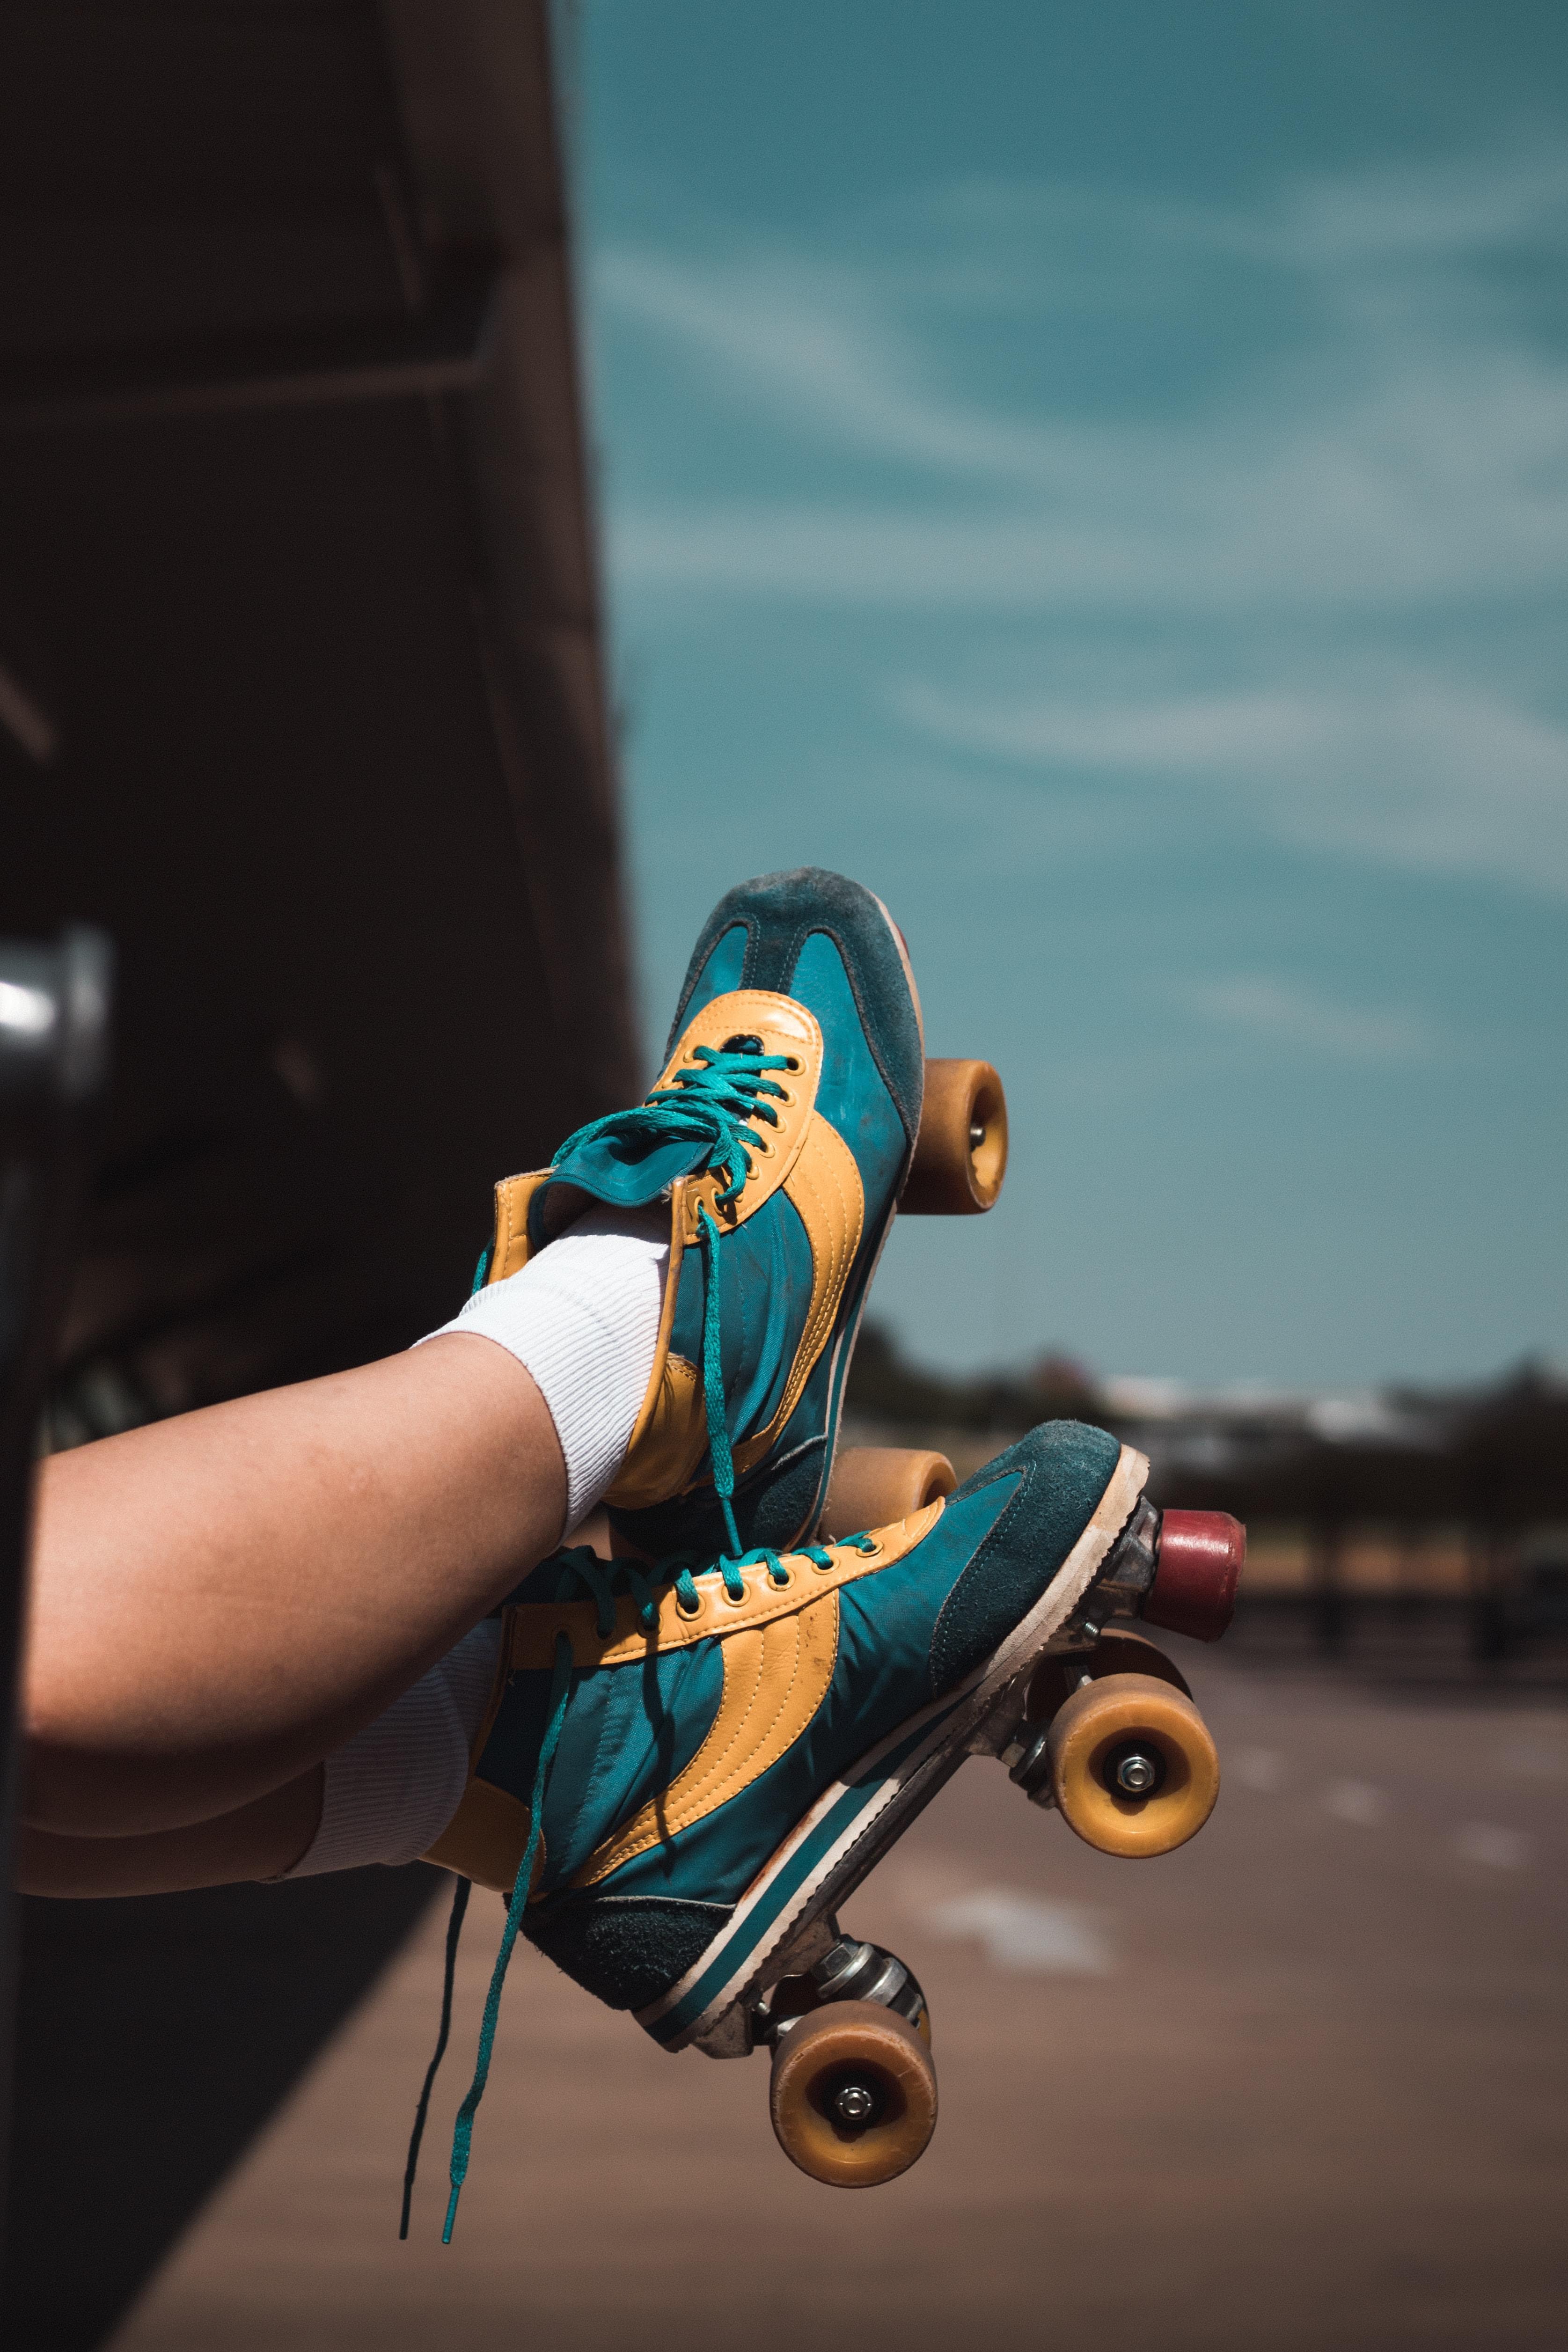 A pair of legs and feet wearing teal roller skates against a blue sky